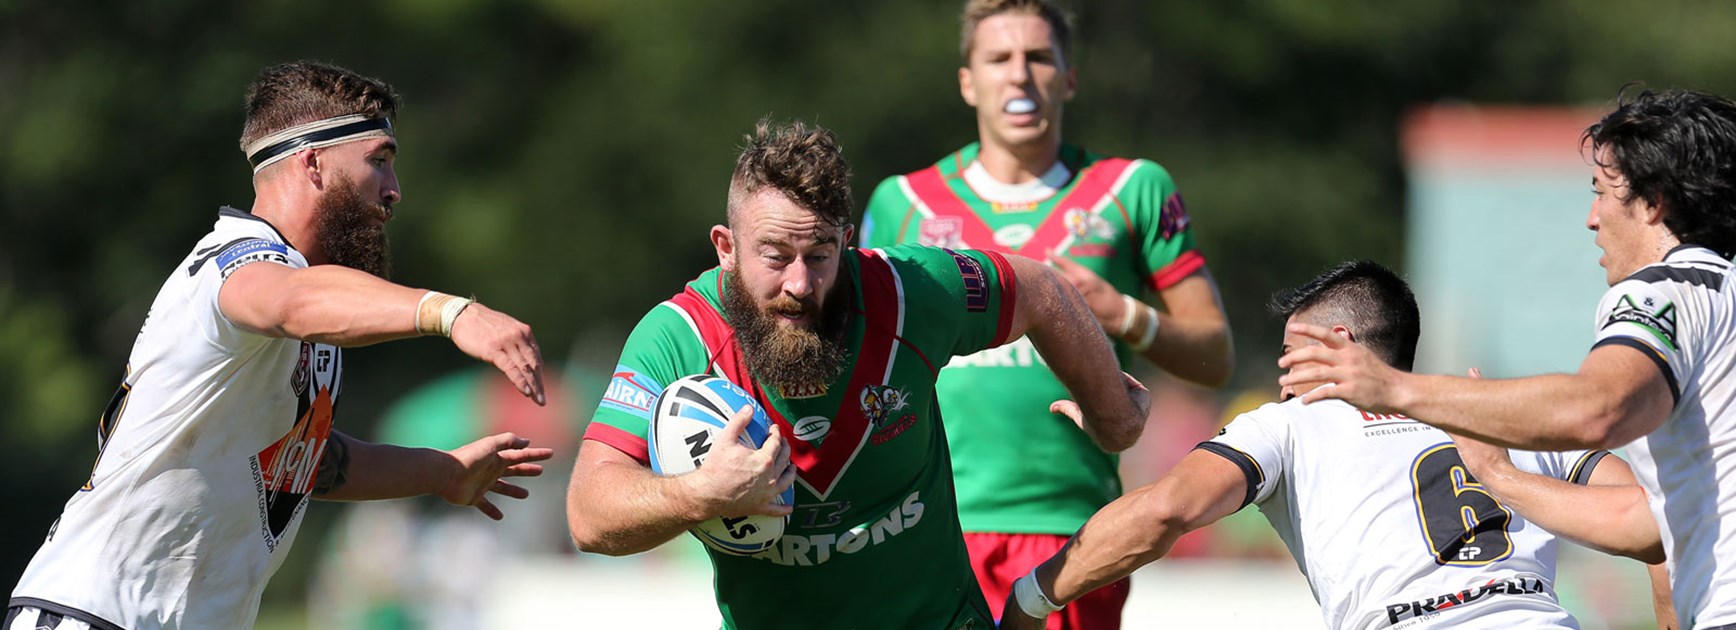 Wynnum's Ben Shea surges through the Souths Logan defence in Round 4 of the Intrust Super Cup.